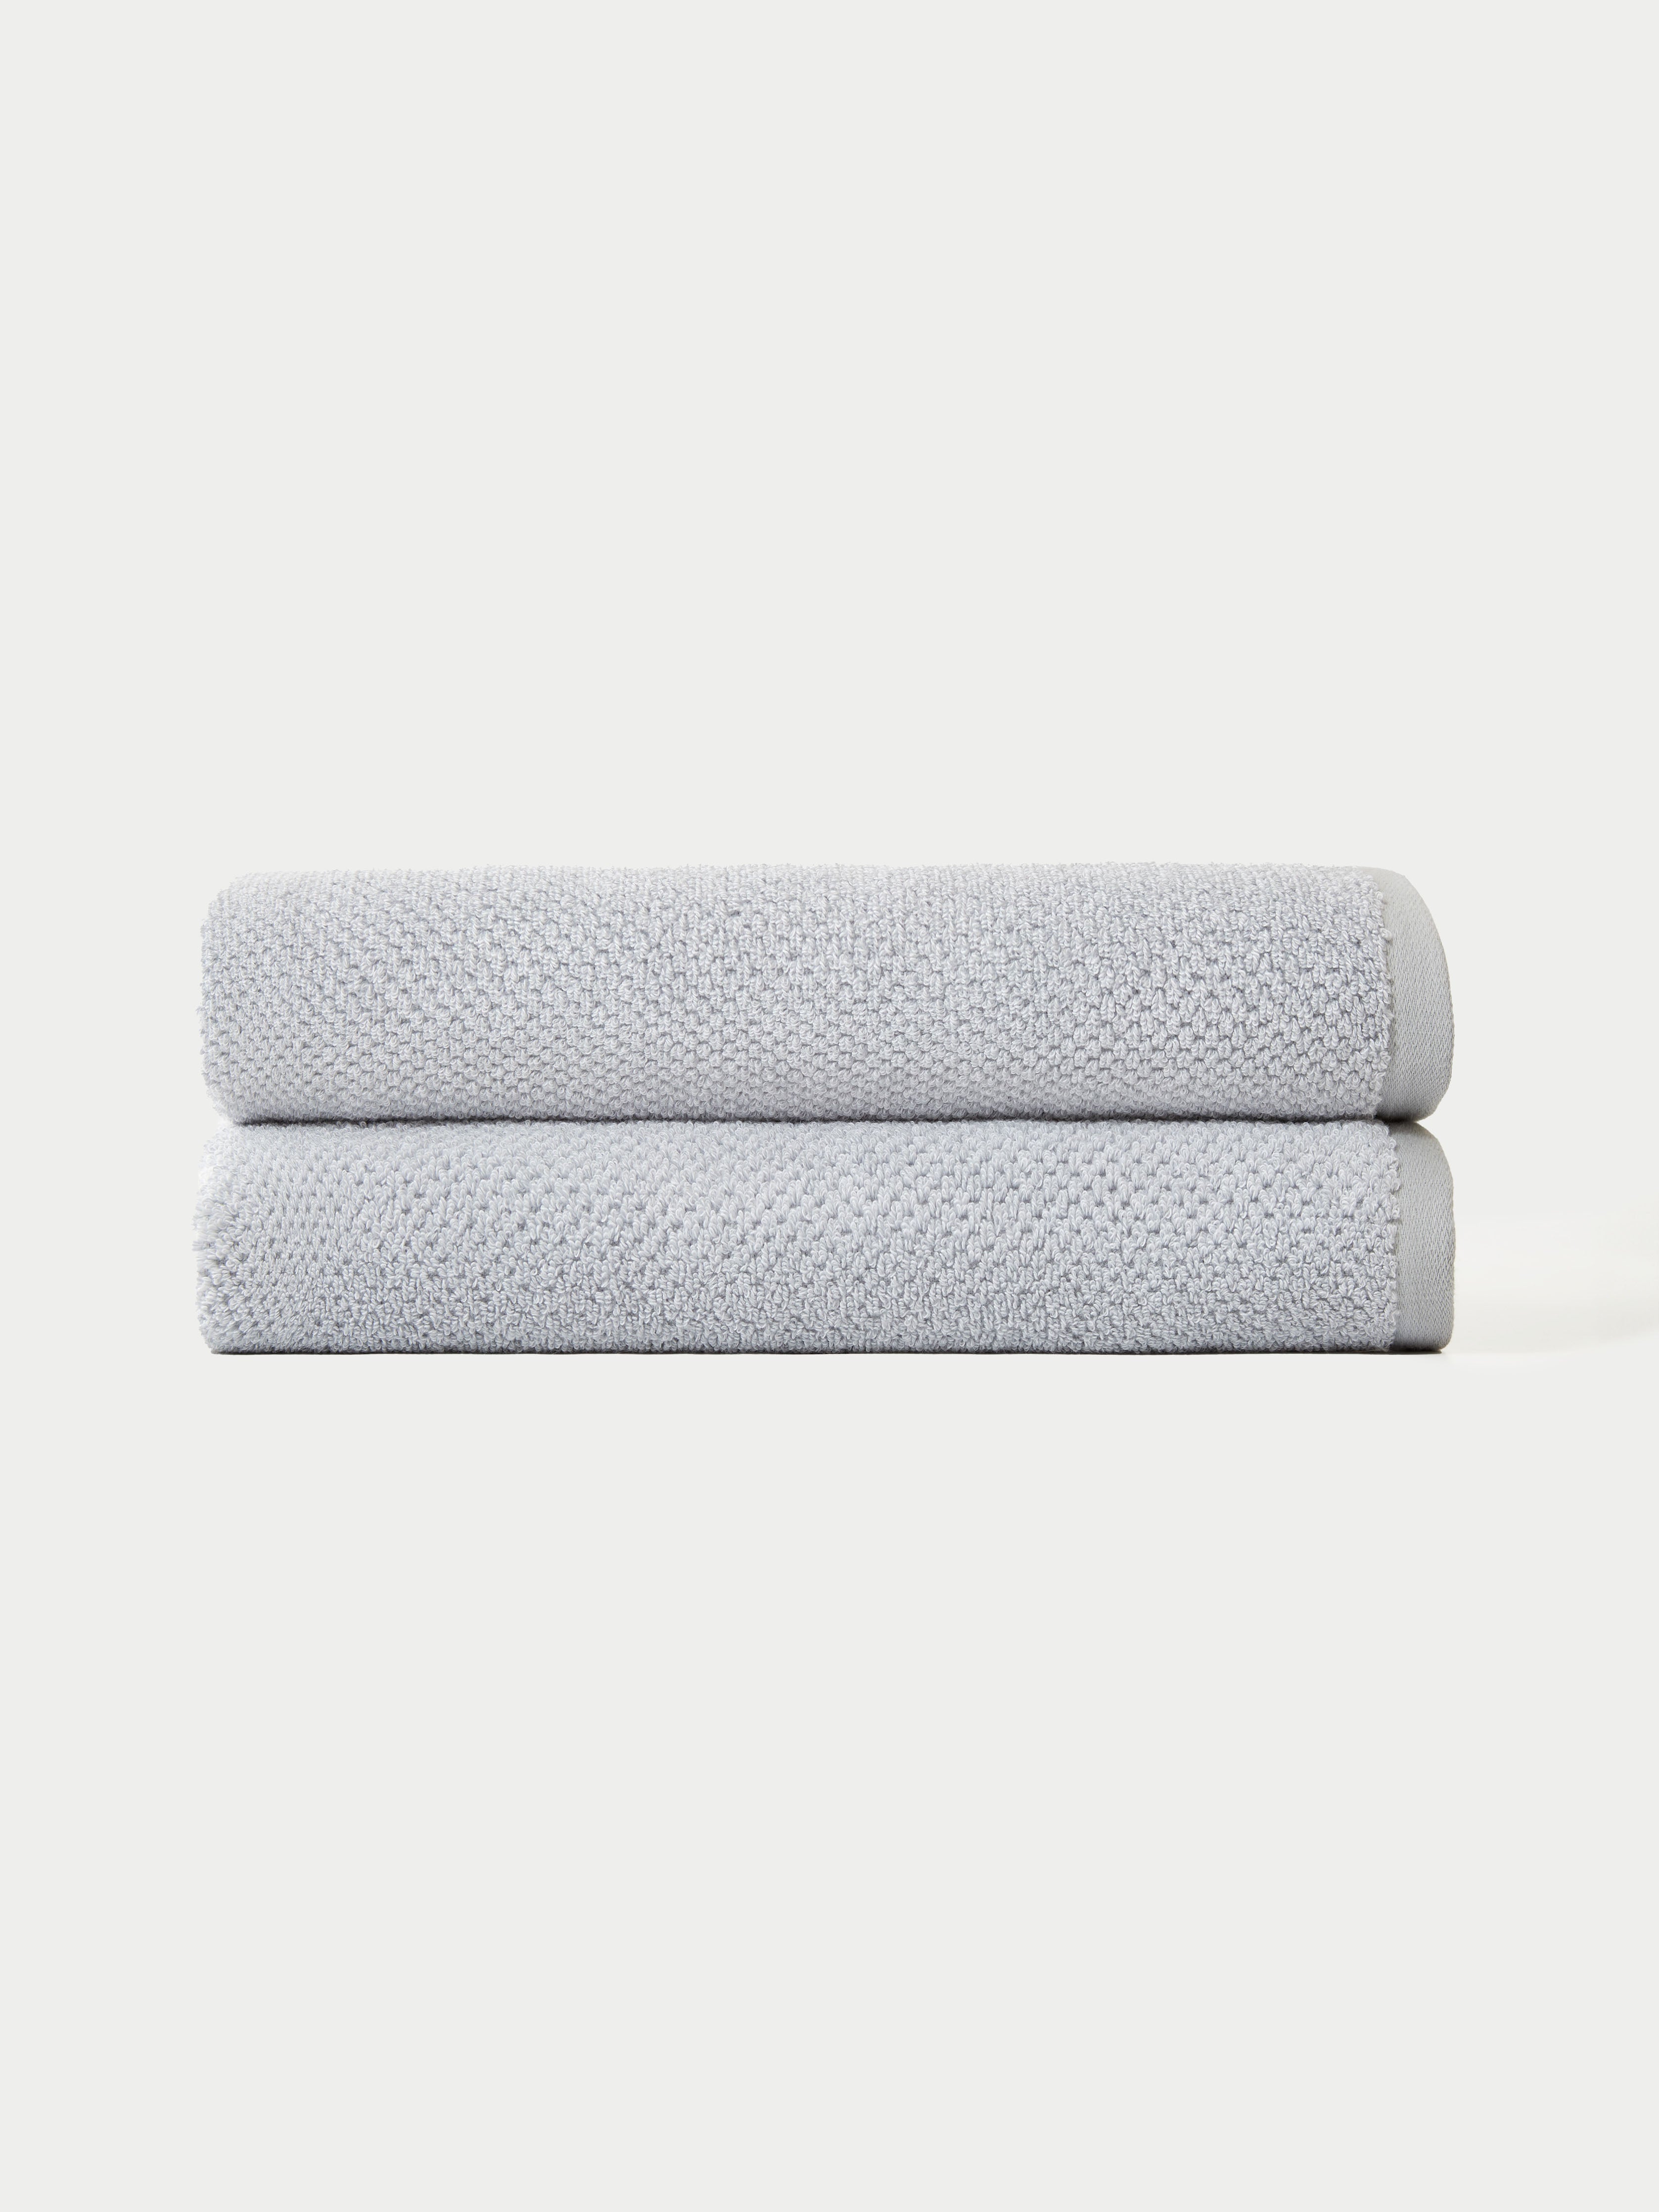 Nantucket Bath Sheets in the color Heathered Harbor Mist. The bath sheets are neatly folded. The photo of the bath sheets was taken with a white background.|Color:Heathered Harbor Mist